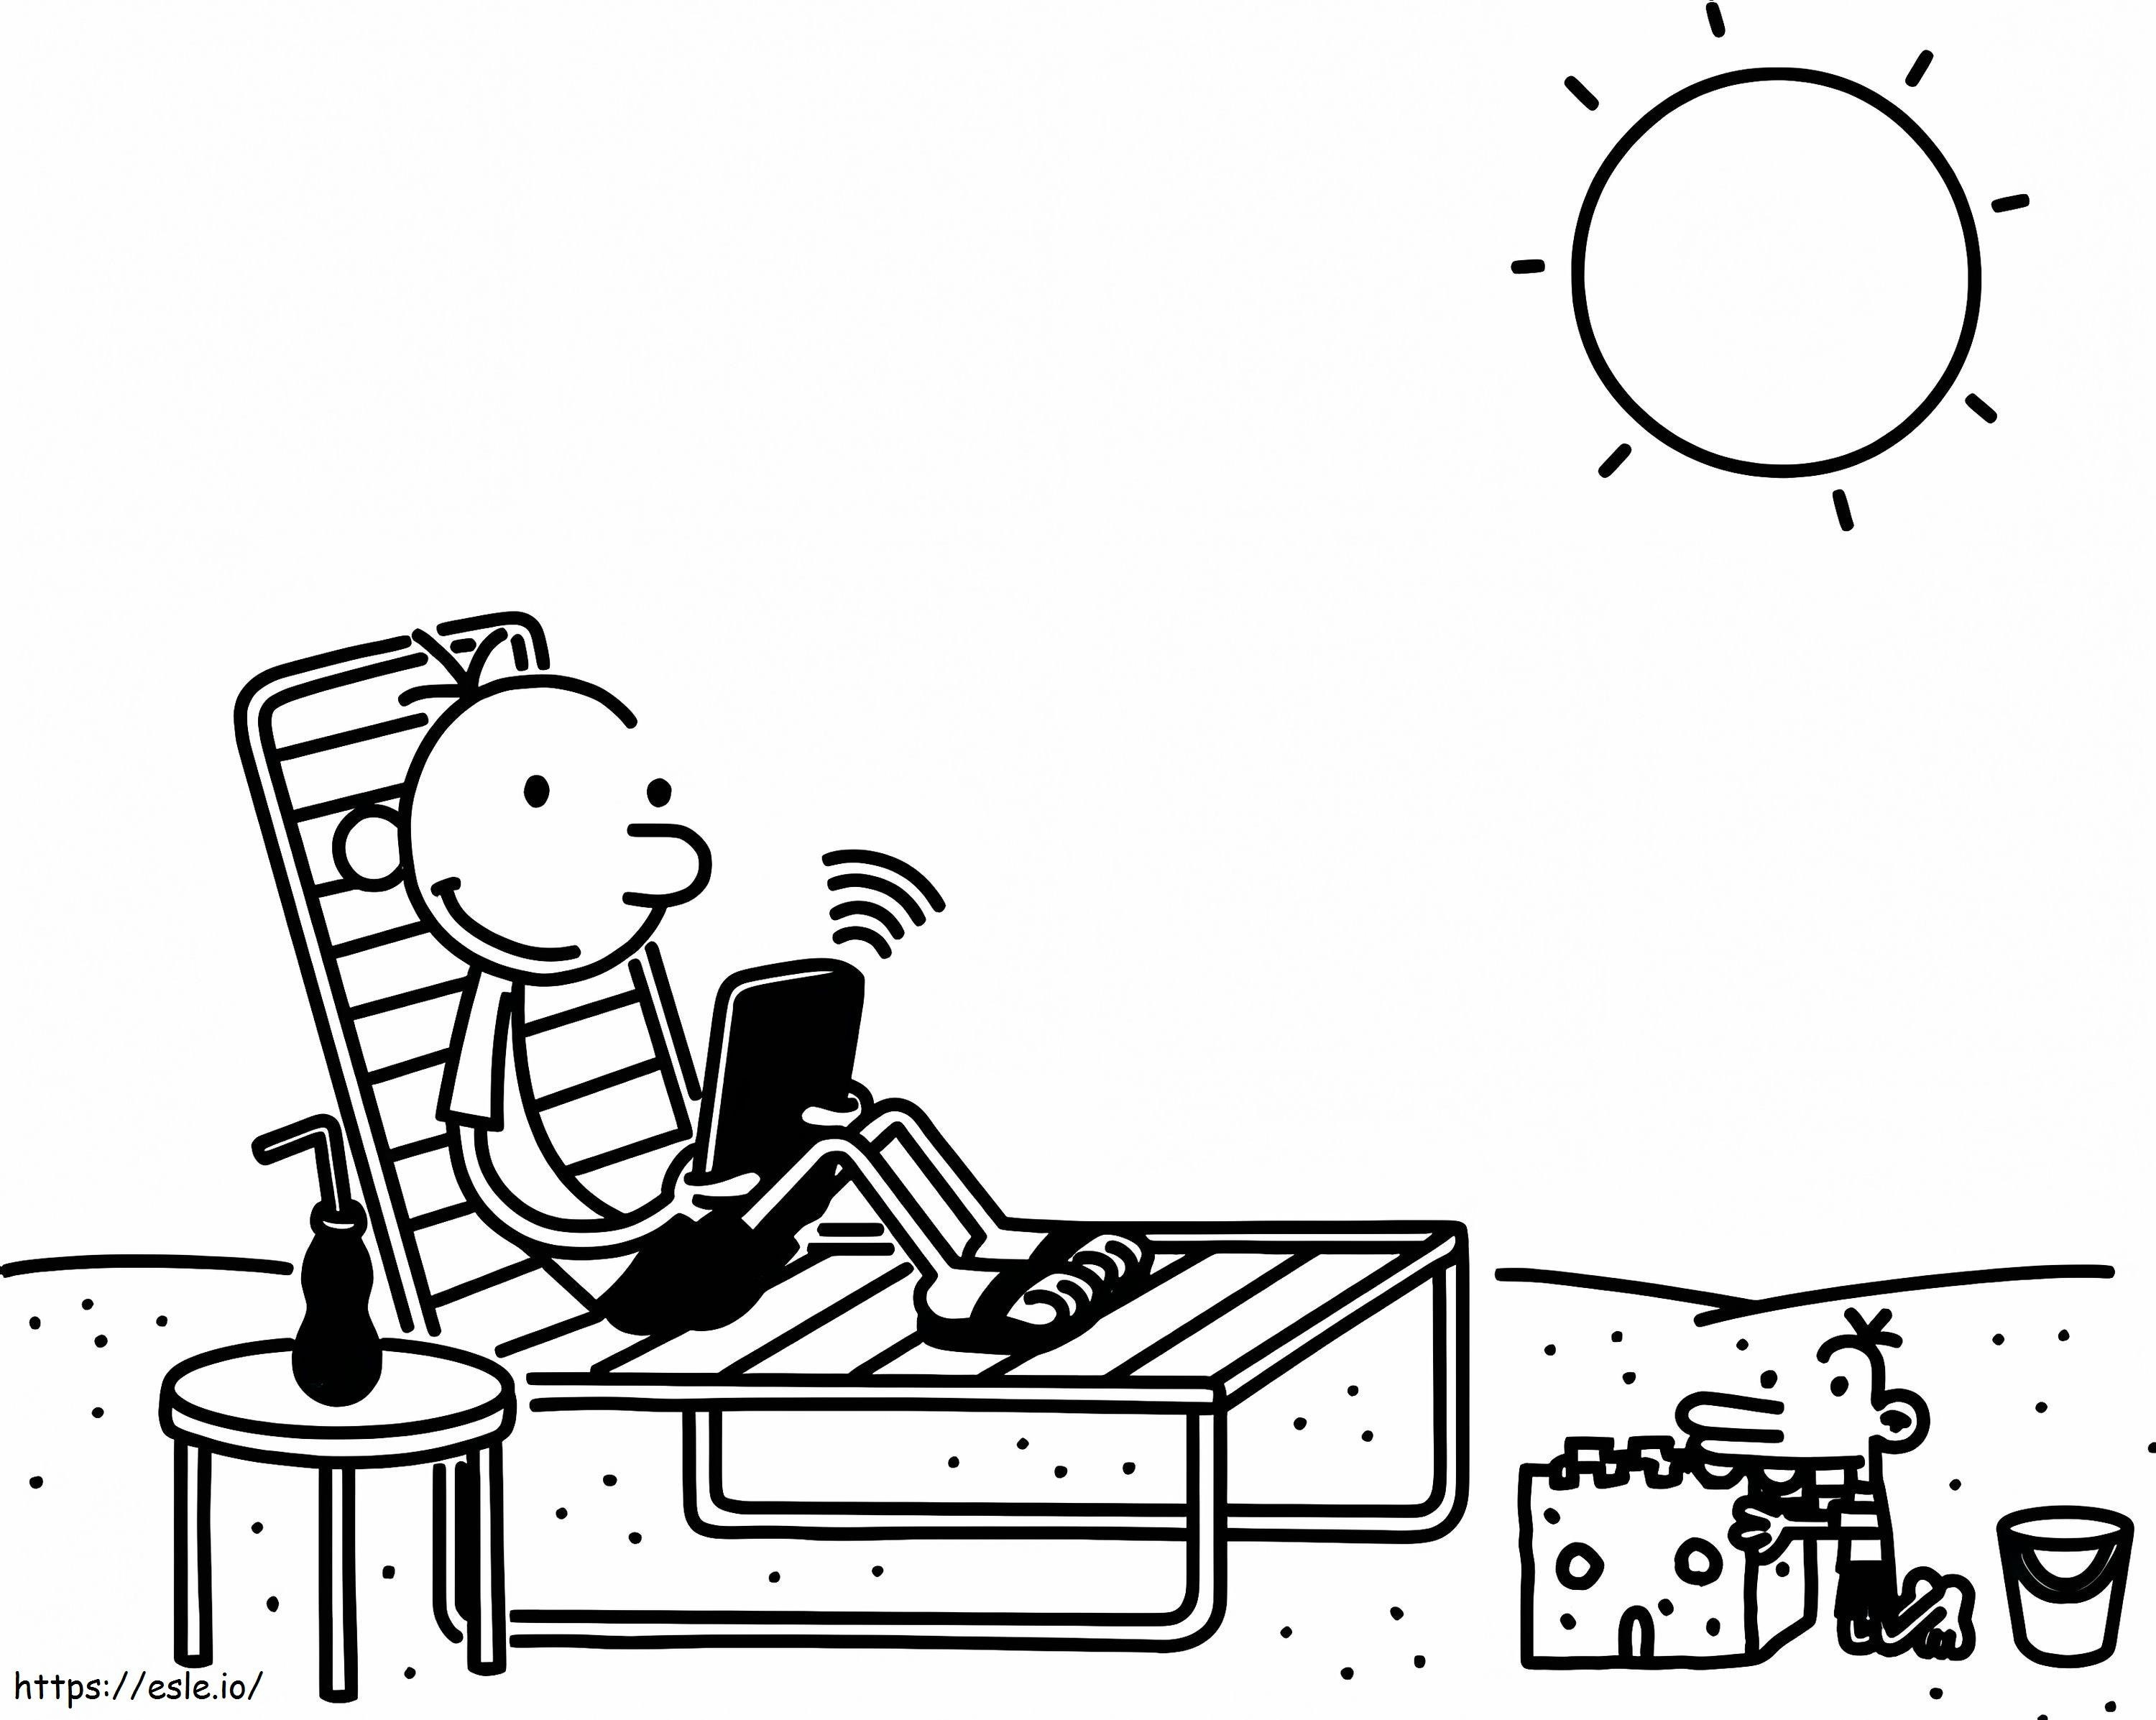 A Wimpy Kid On The Beach coloring page